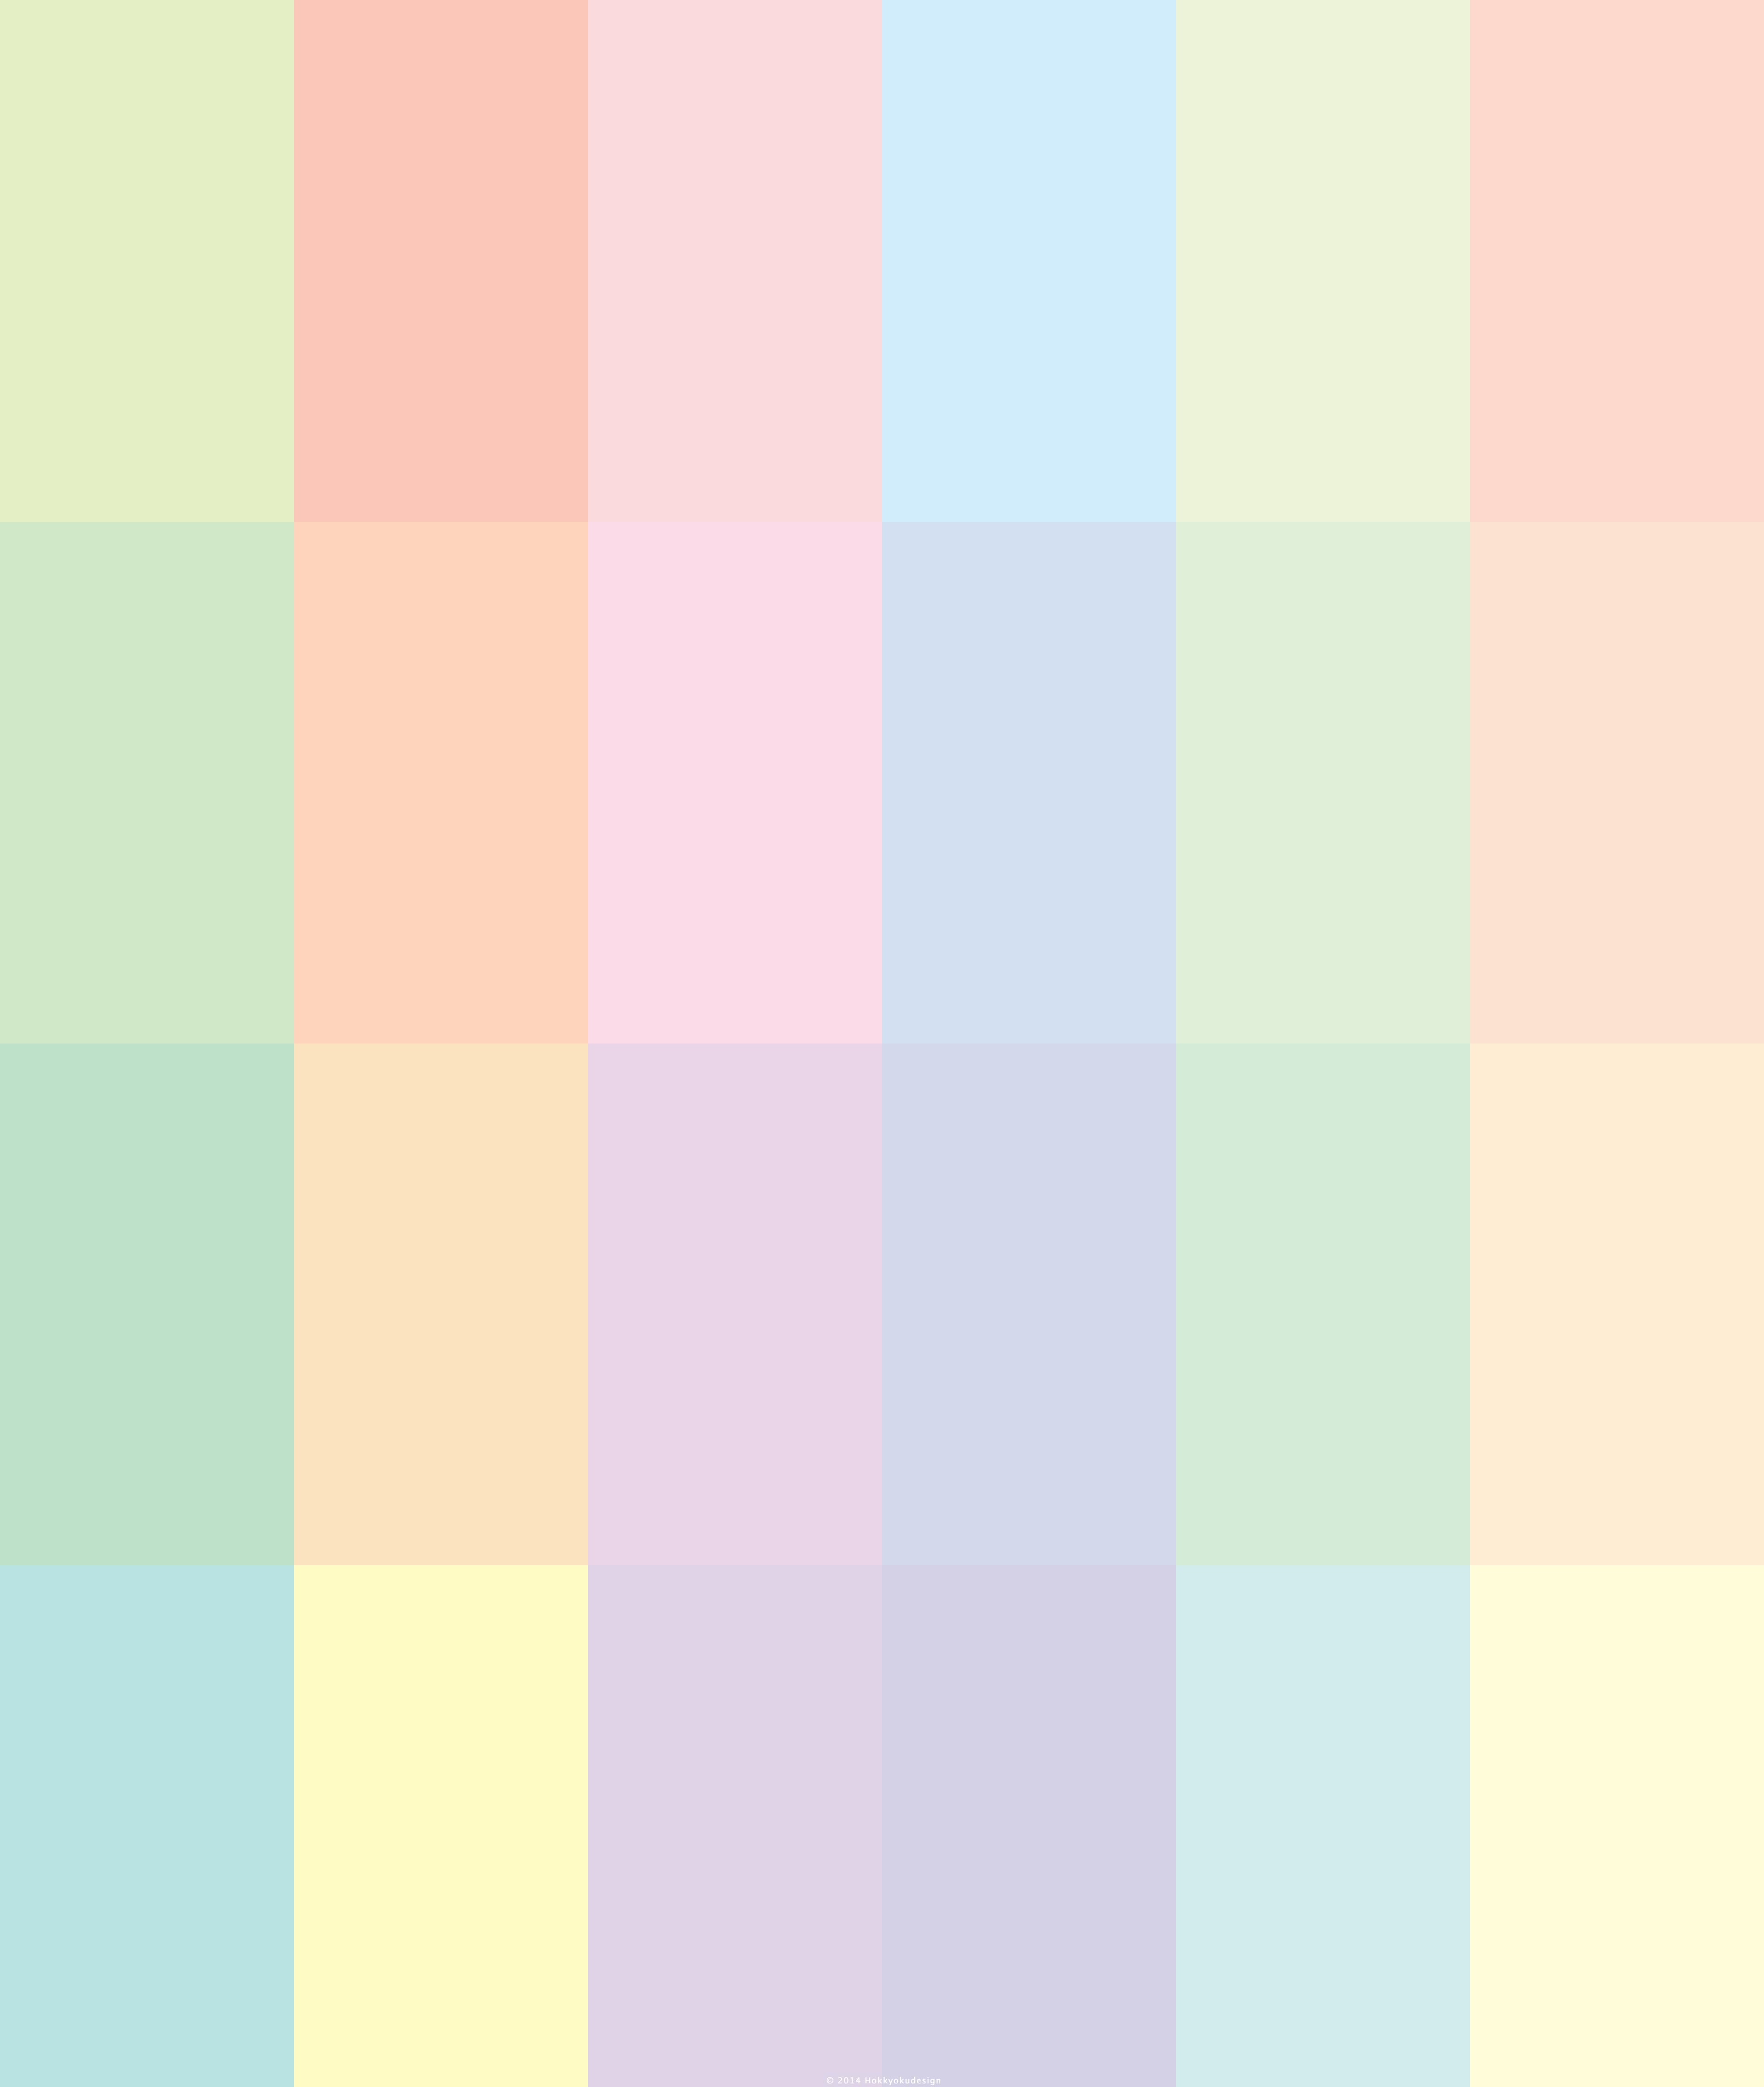 Free Download No6 Bright Pastel Toneultimate Iphone Wallpaper